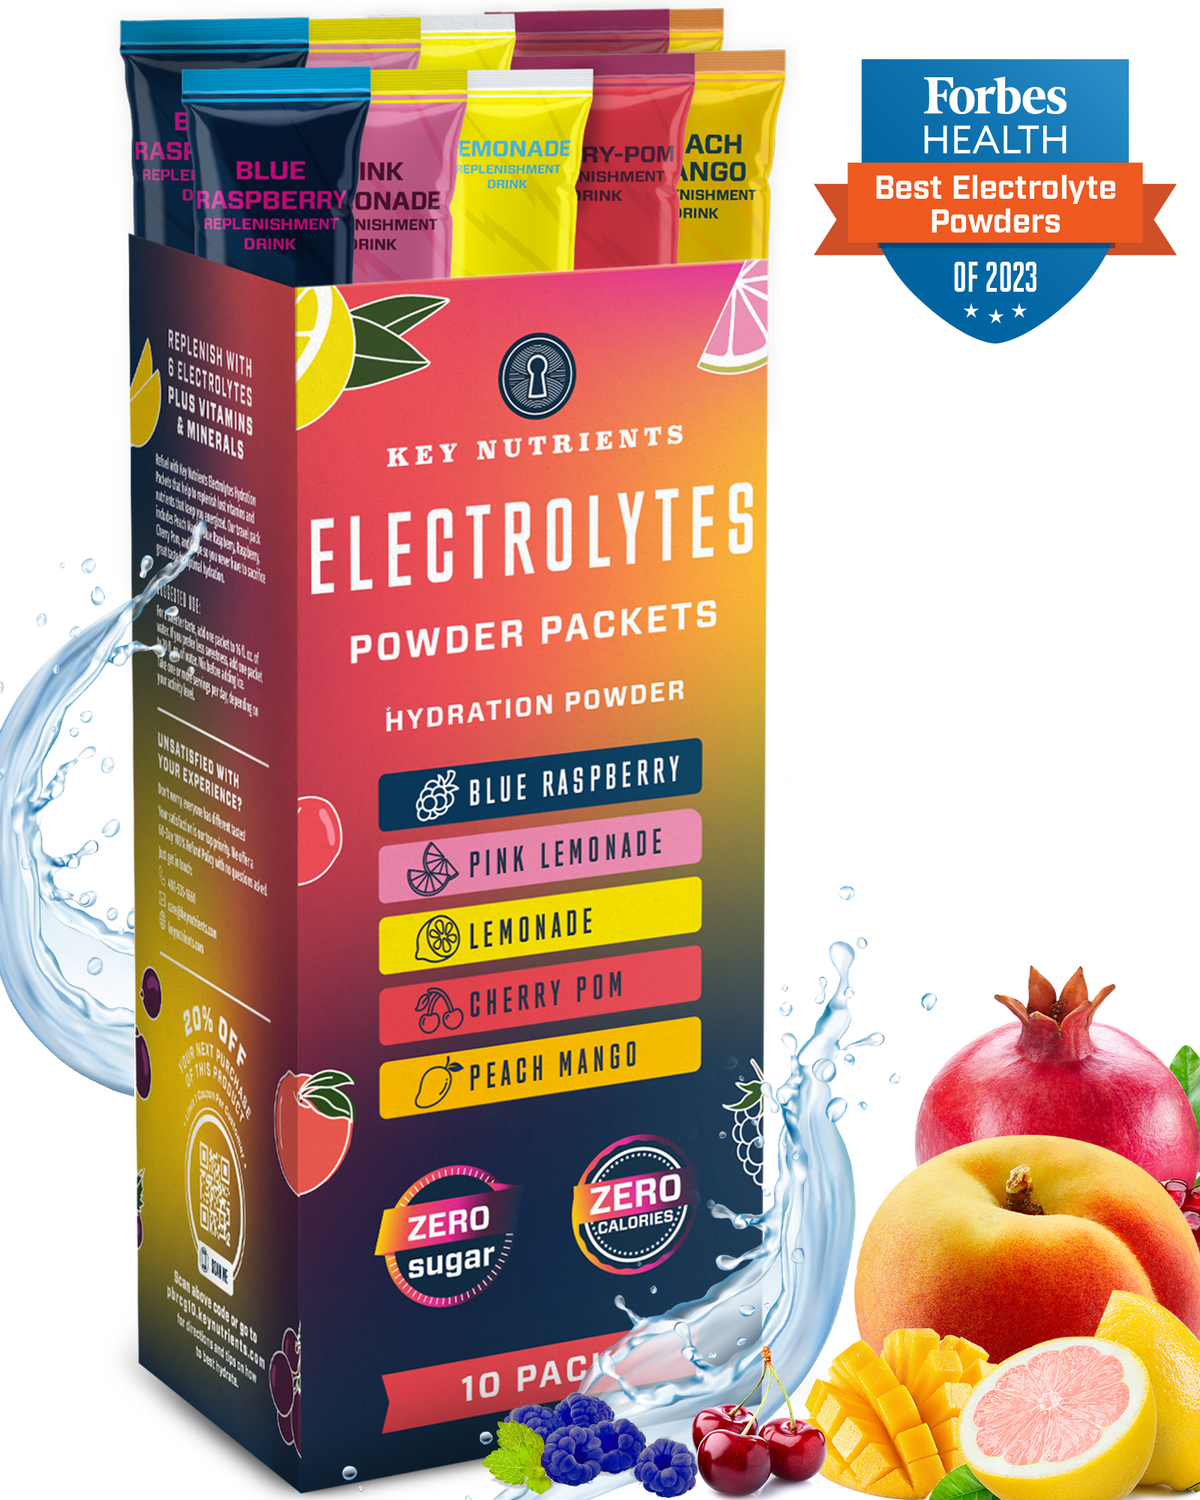 Electrolyte Recovery Plus Powder Travel Packets